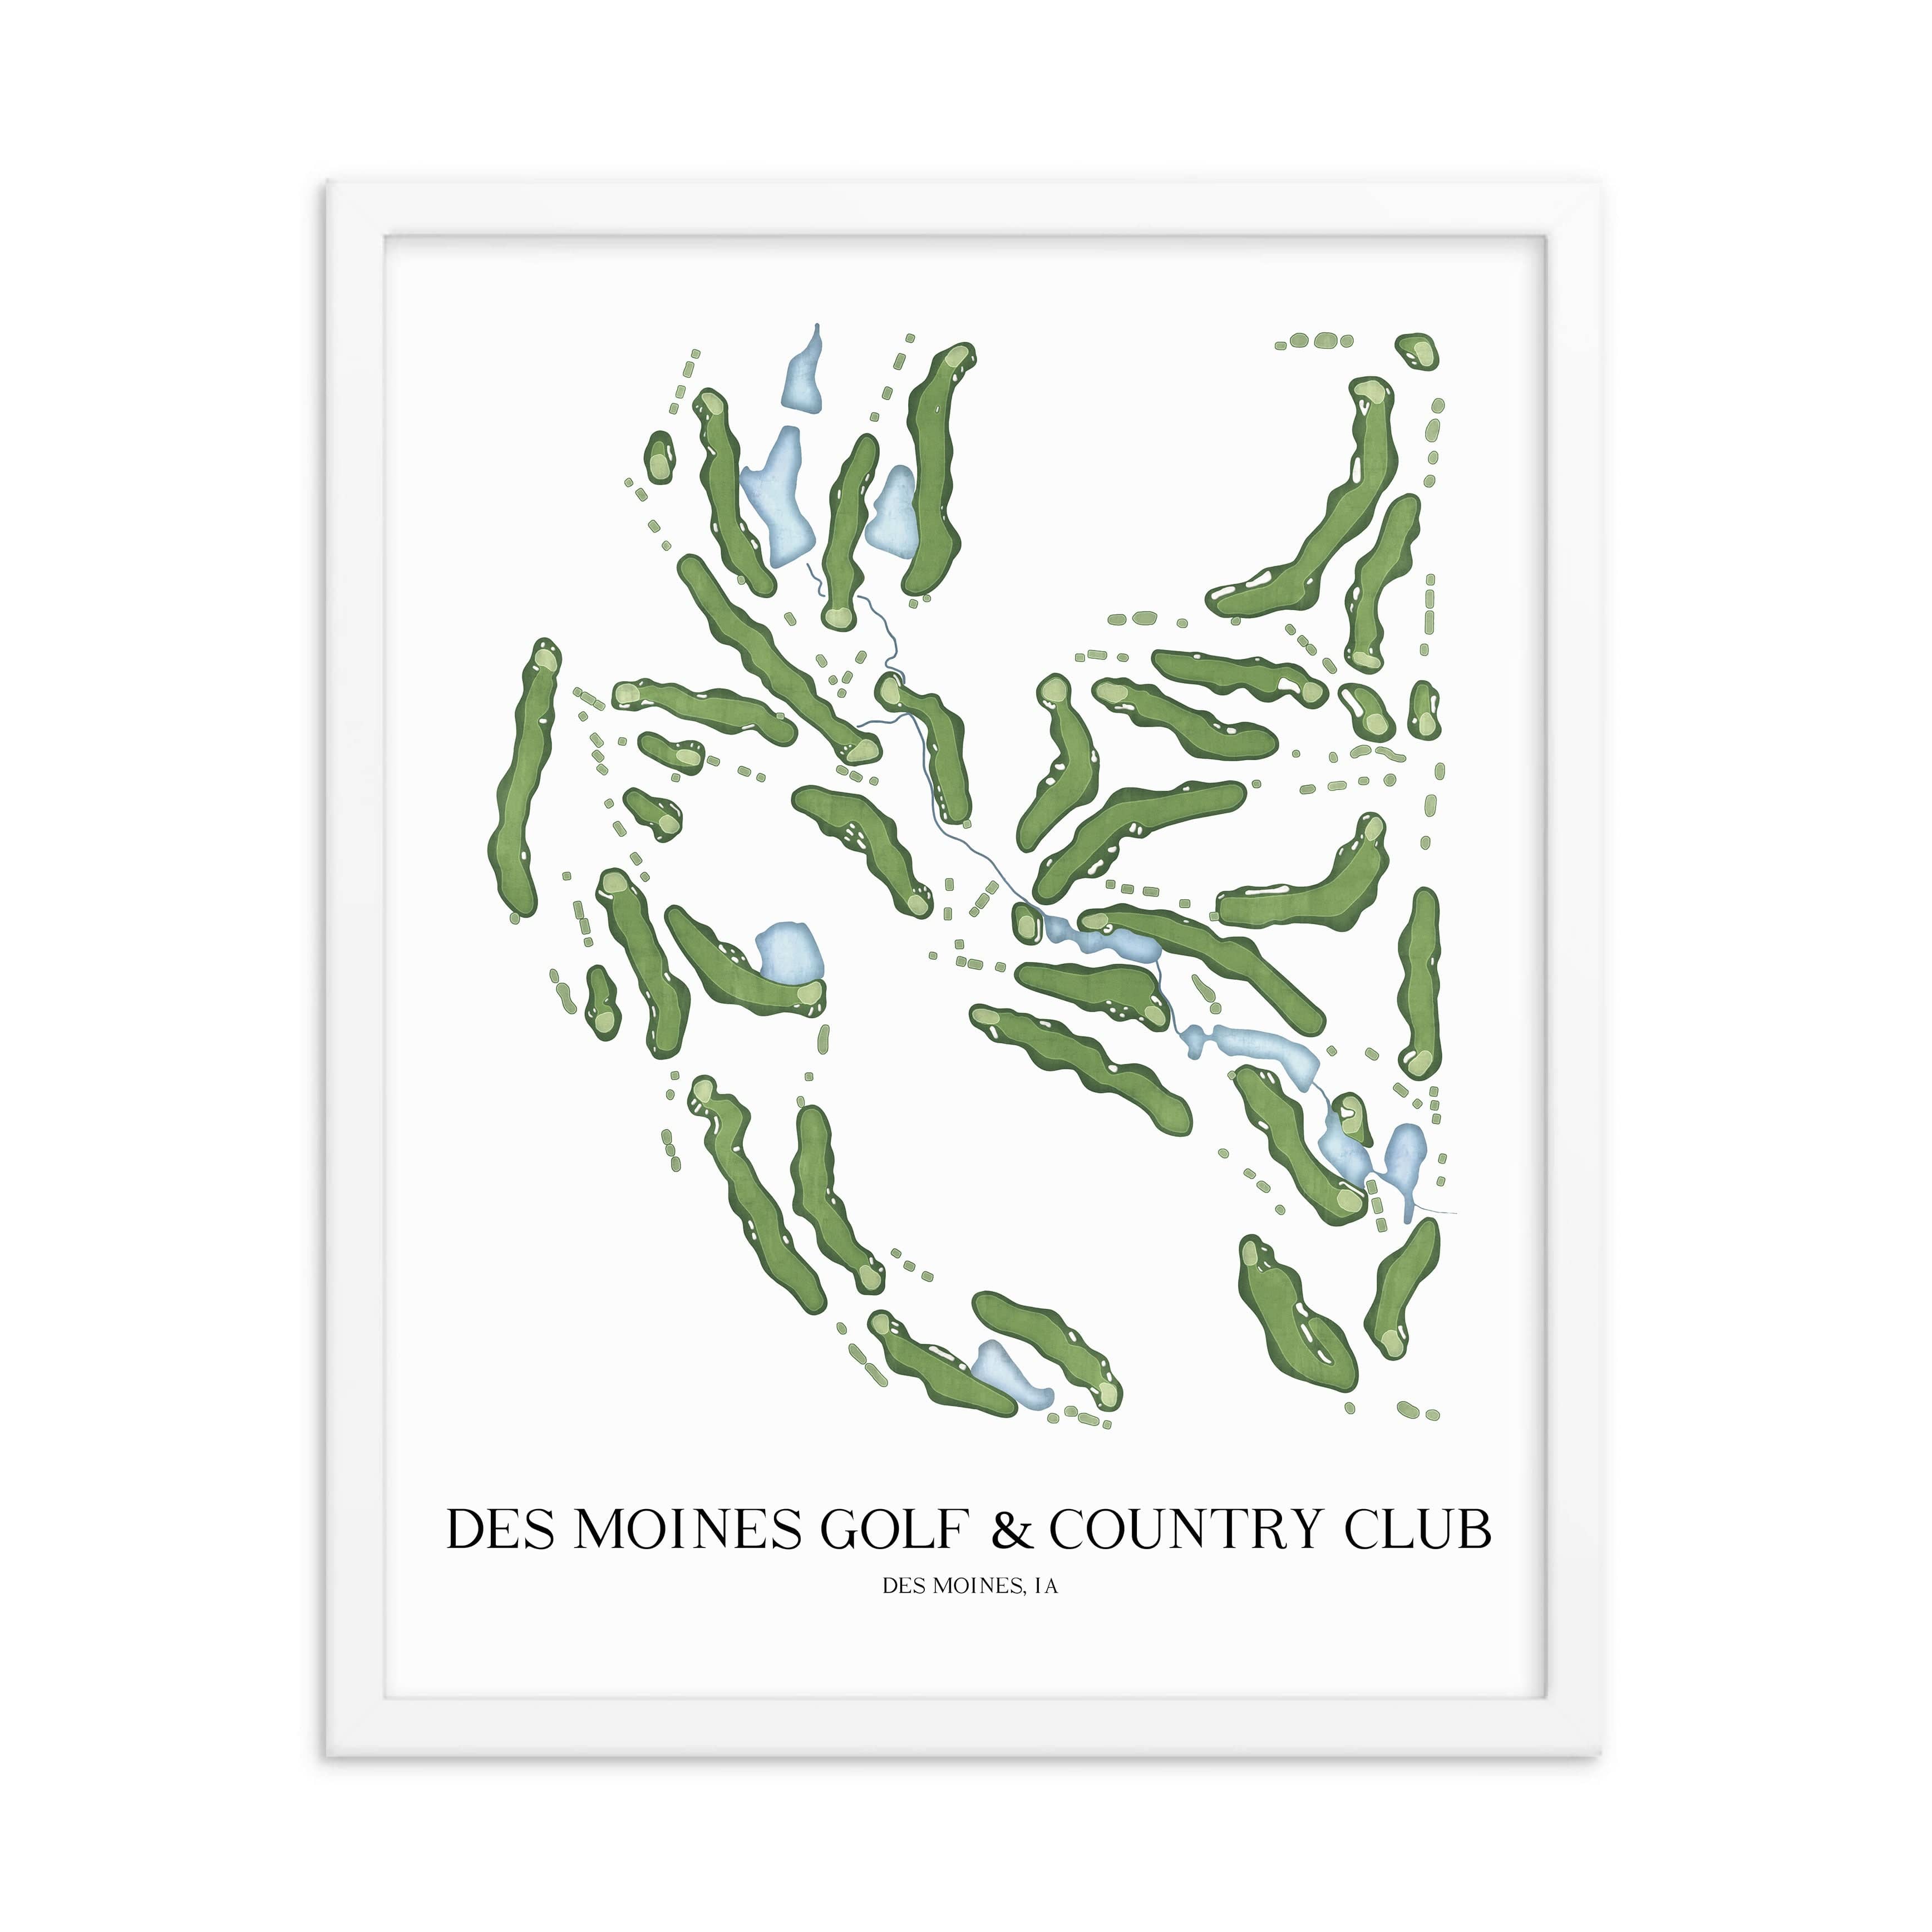 The 19th Hole Golf Shop - Golf Course Prints -  Des Moines Golf and Country Club Golf Course Map